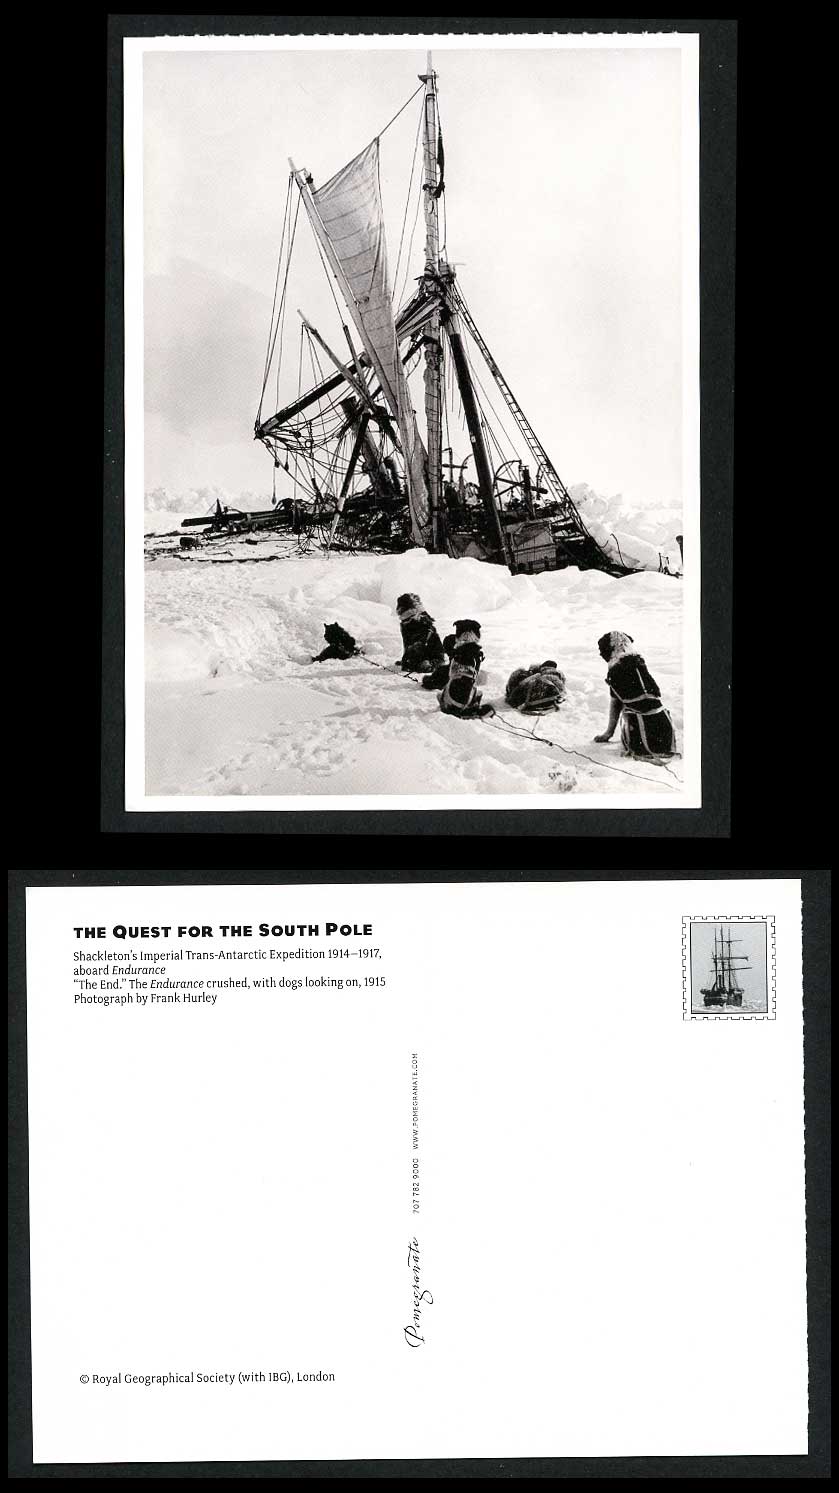 Shackleton's Imperial Trans-Antarctic Expedition Postcard Endurance Crushed DOGS